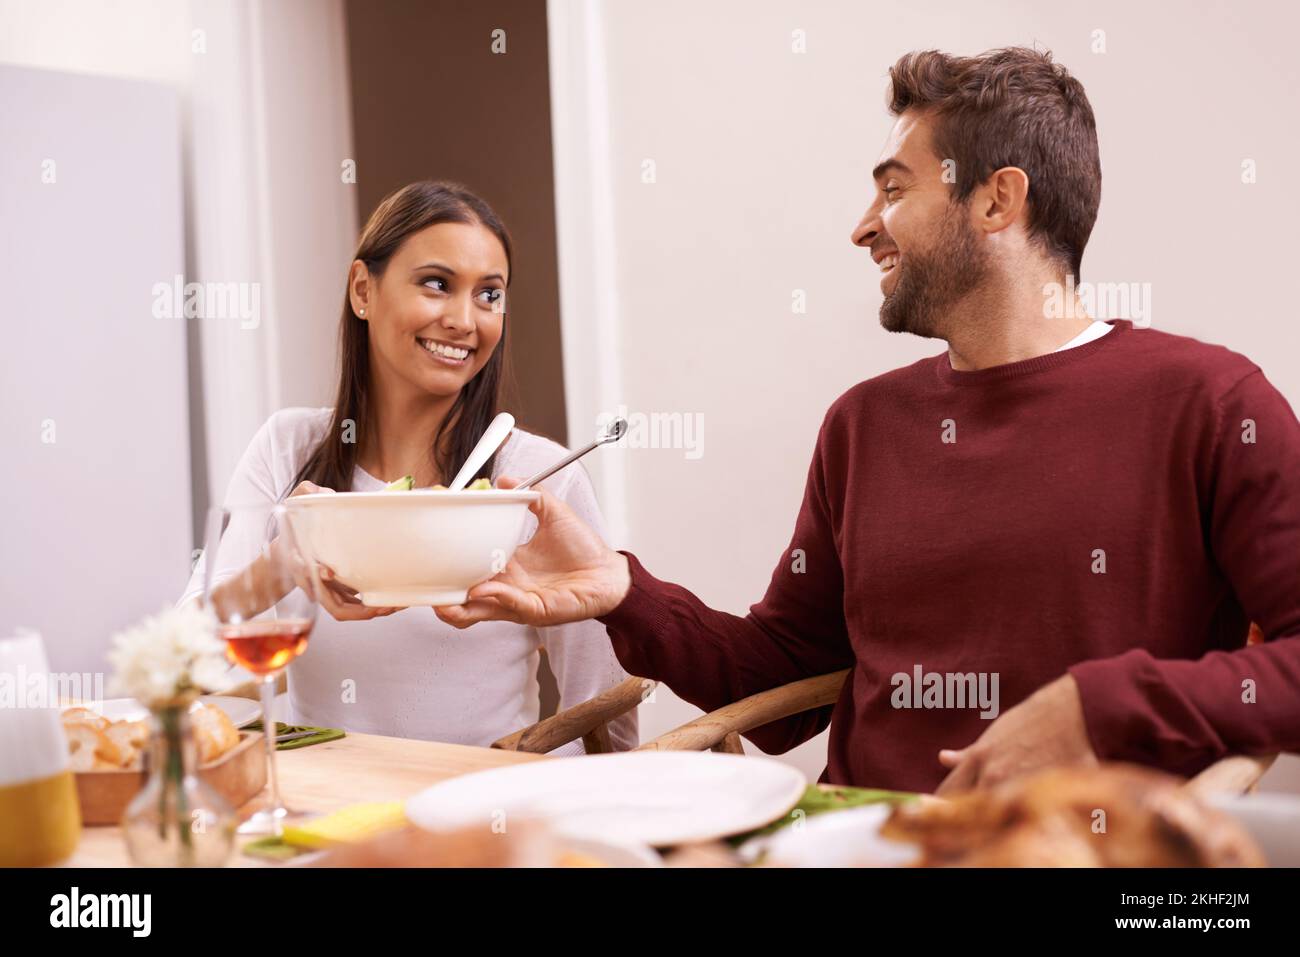 Hes such a gentlemen. A happy couple enjoying a family meal around the table. Stock Photo